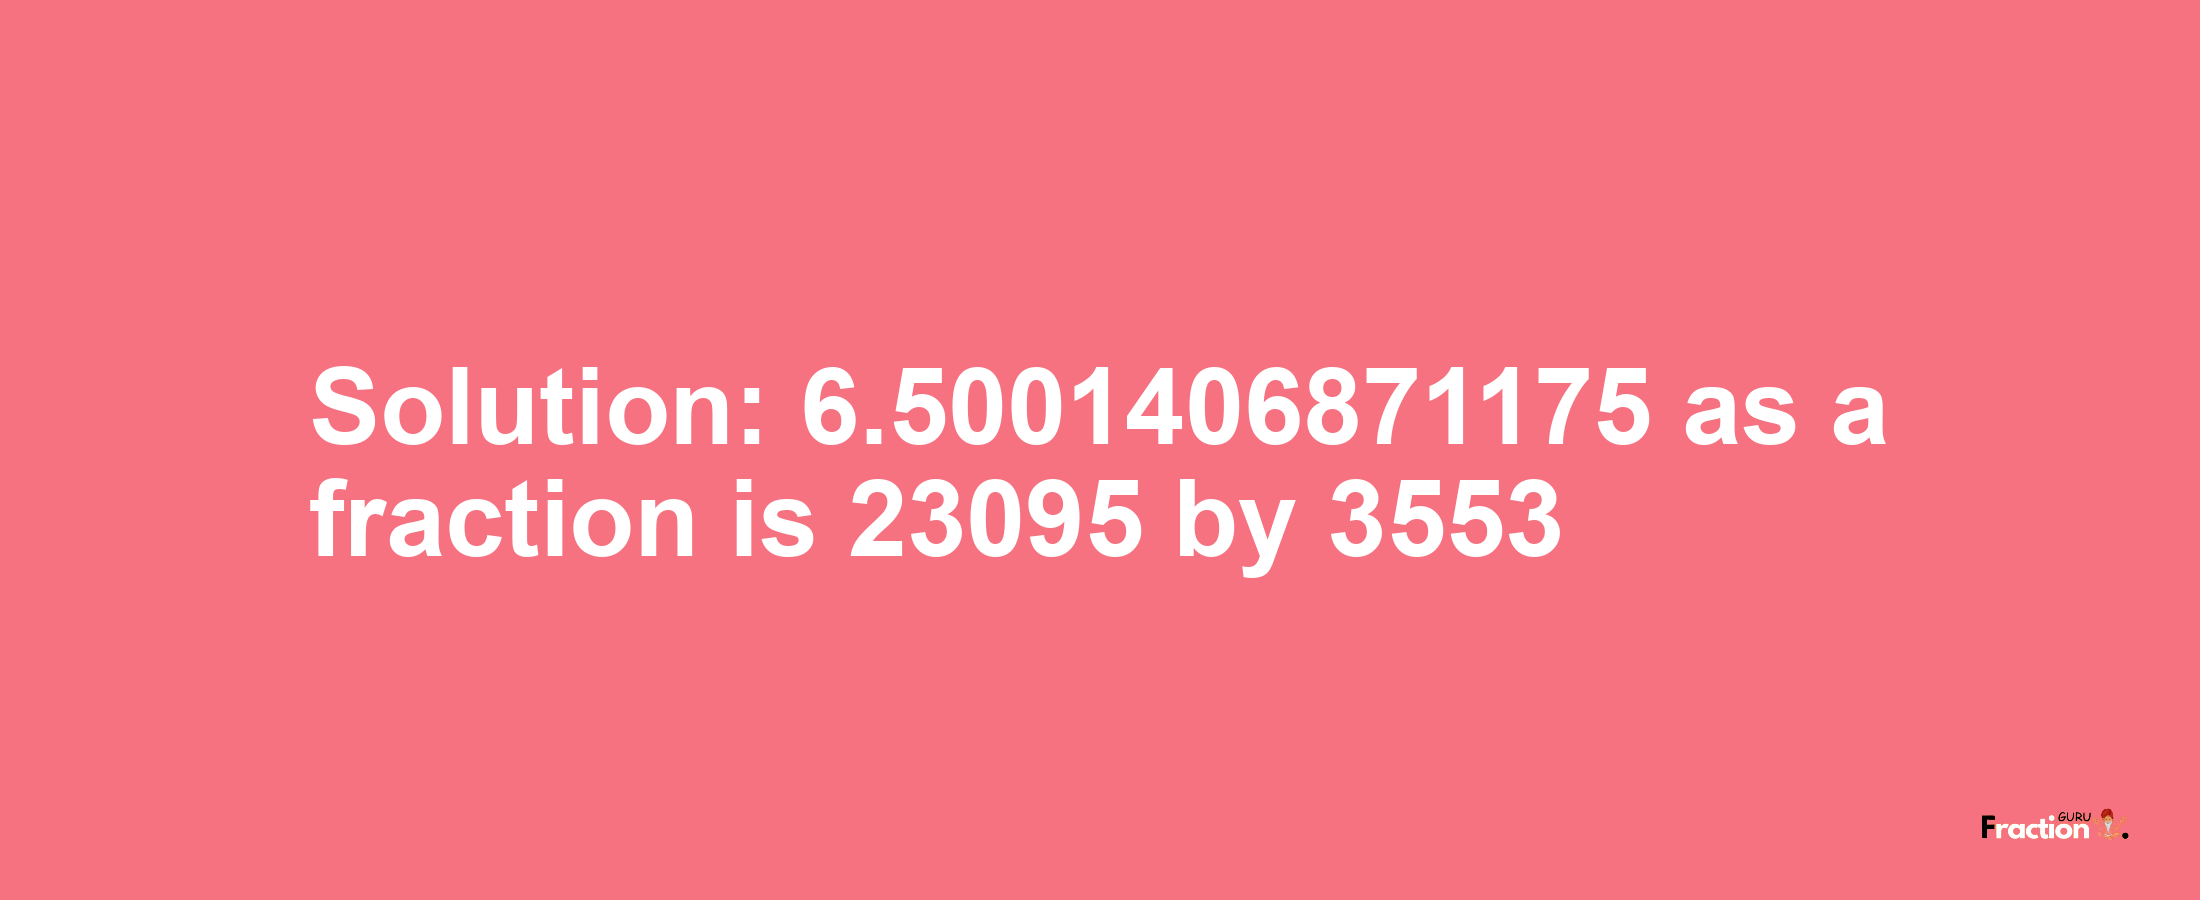 Solution:6.5001406871175 as a fraction is 23095/3553